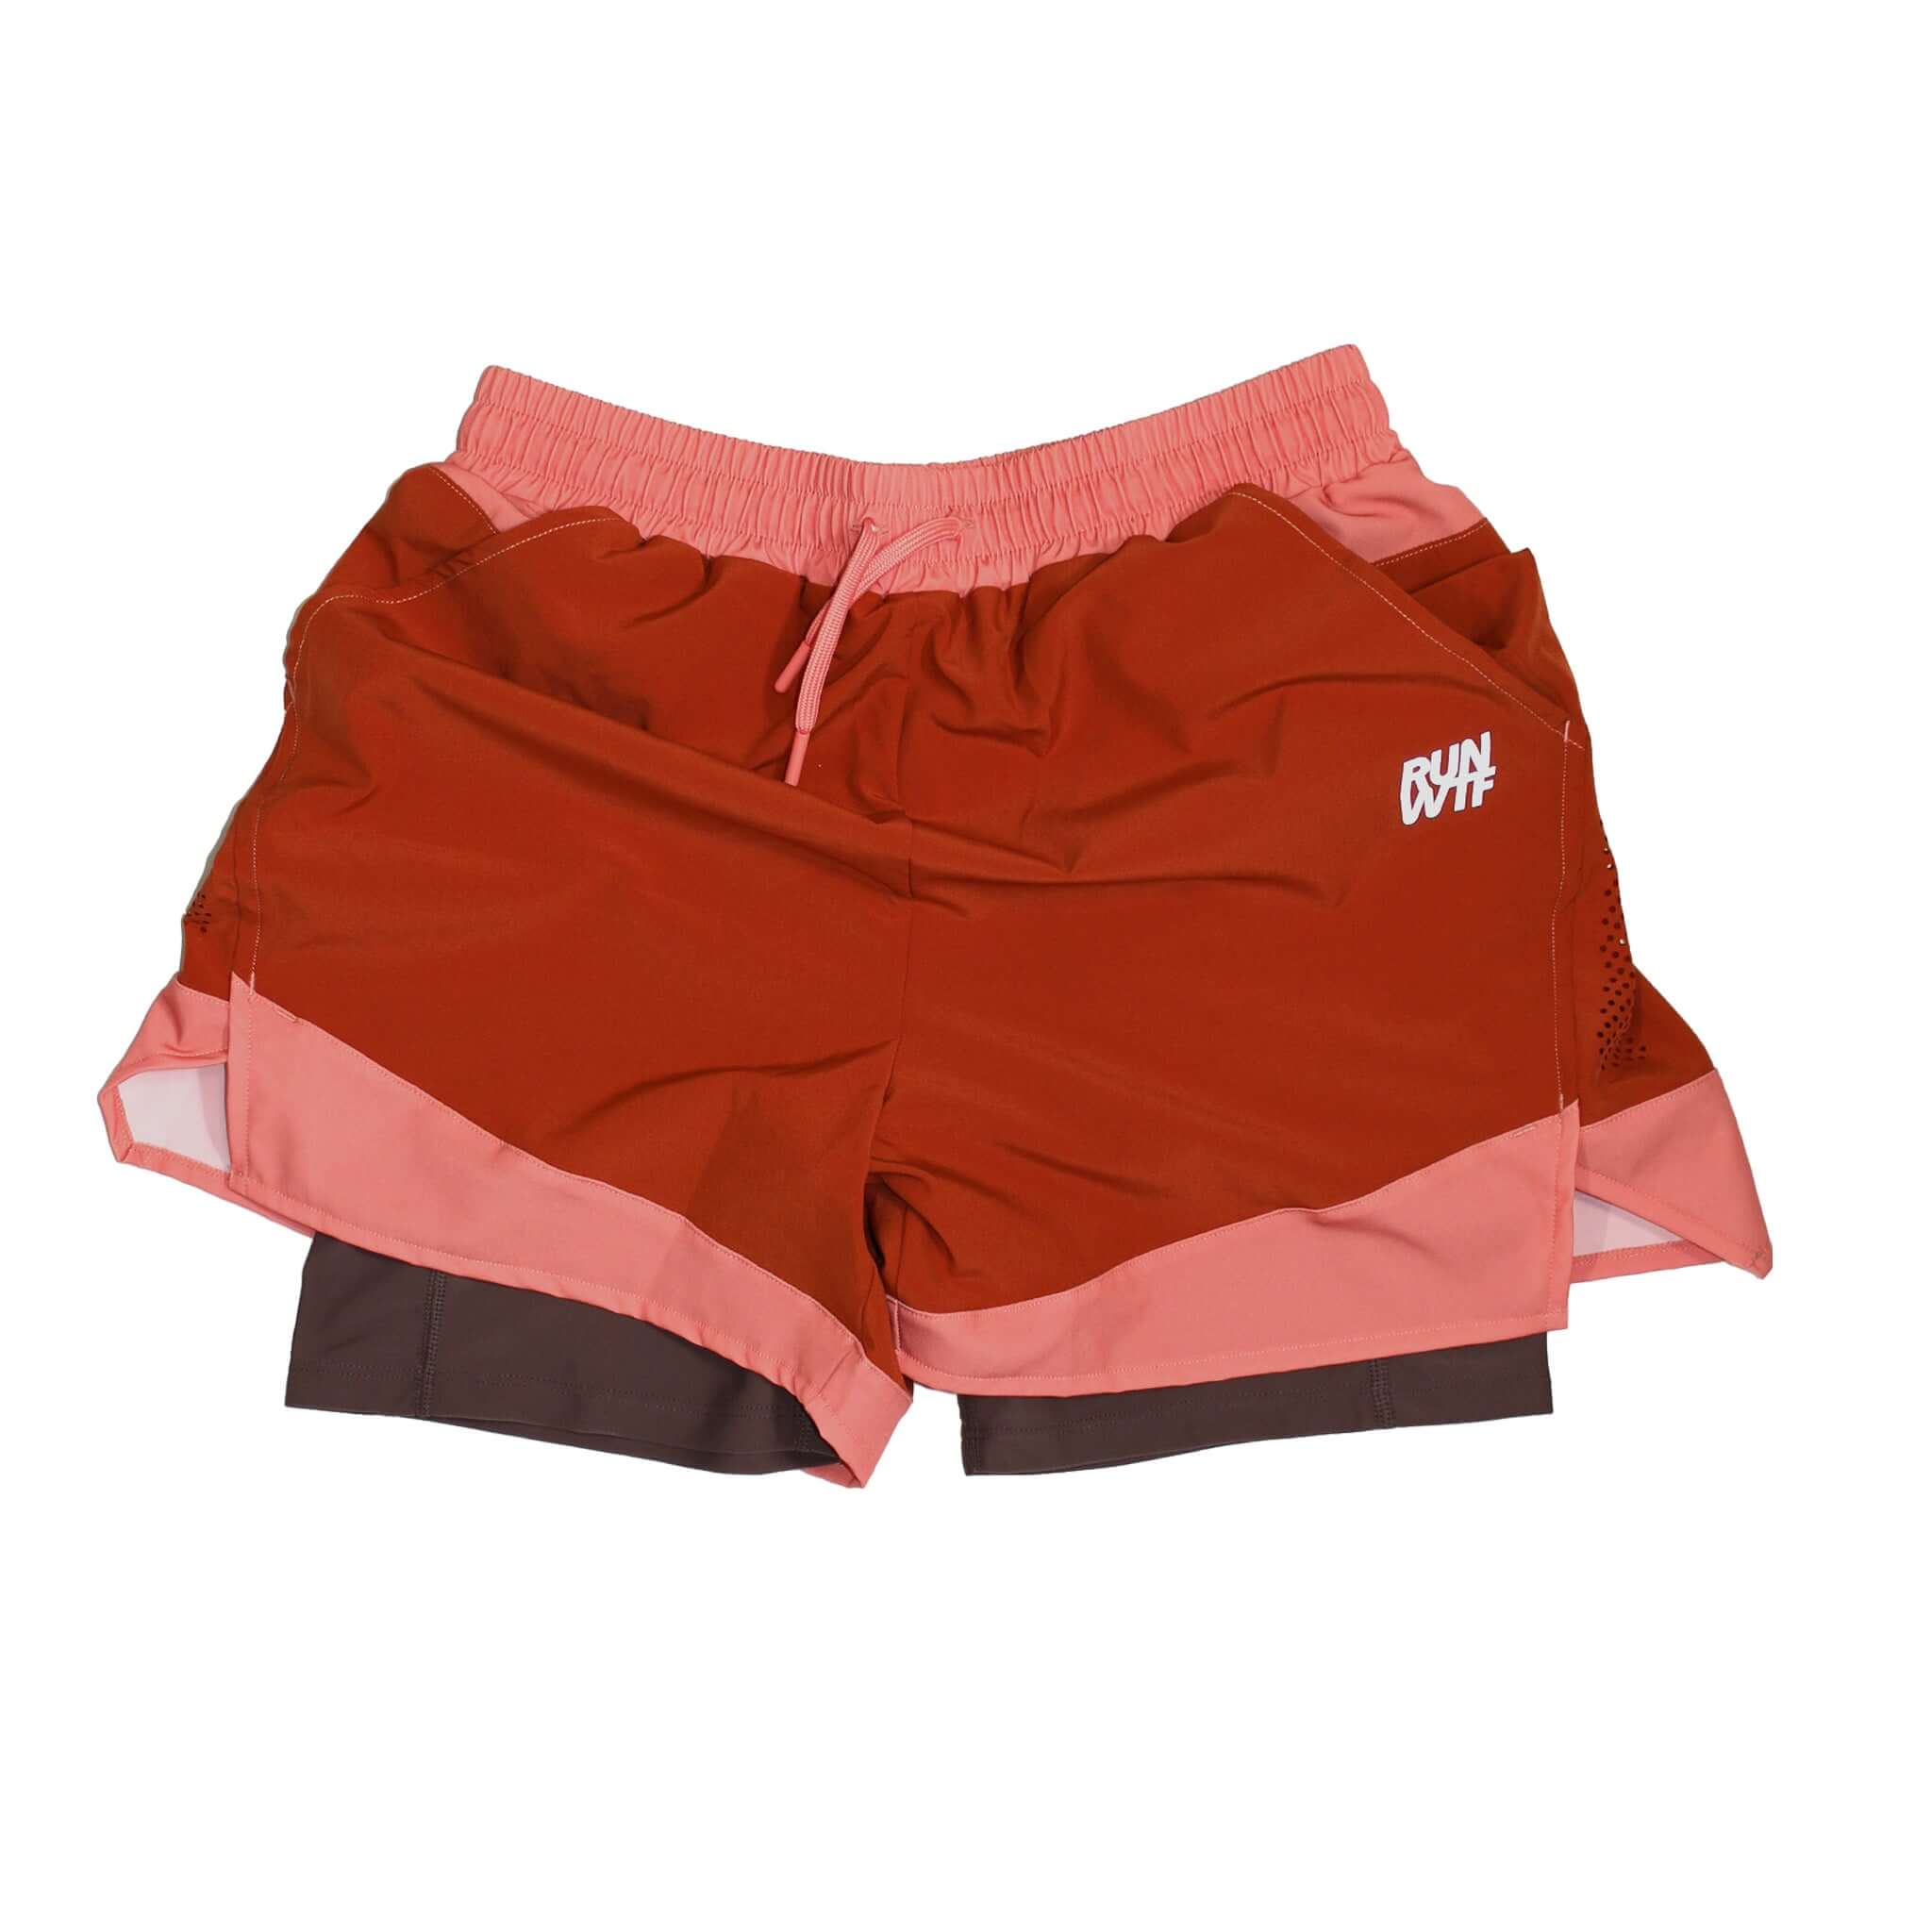 RUN WTF Performance 2in1 Running Shorts for training and competition